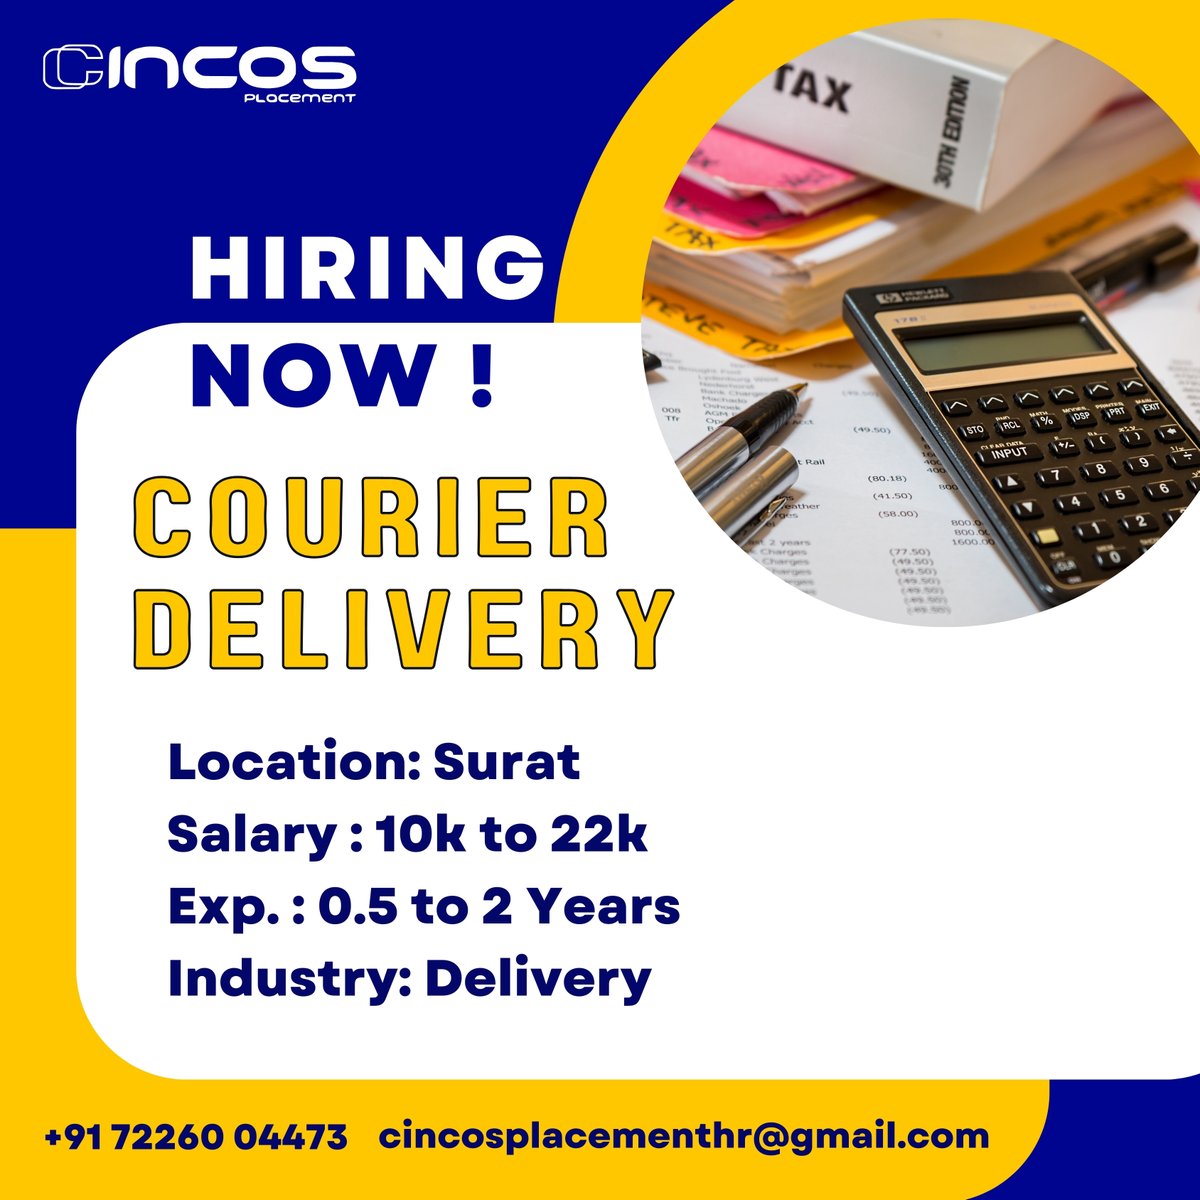 Exciting opportunity for Courier Delivery! Join us with the best job placement consultant in Surat.

Contact Us
Phone: +91 7226004473

#CourierDelivery #SuratJobs #FastTrack #ProfessionalDevelopment #BestRecruitmentConsultancyInSurat #BestRecruitmentAgencyInSurat